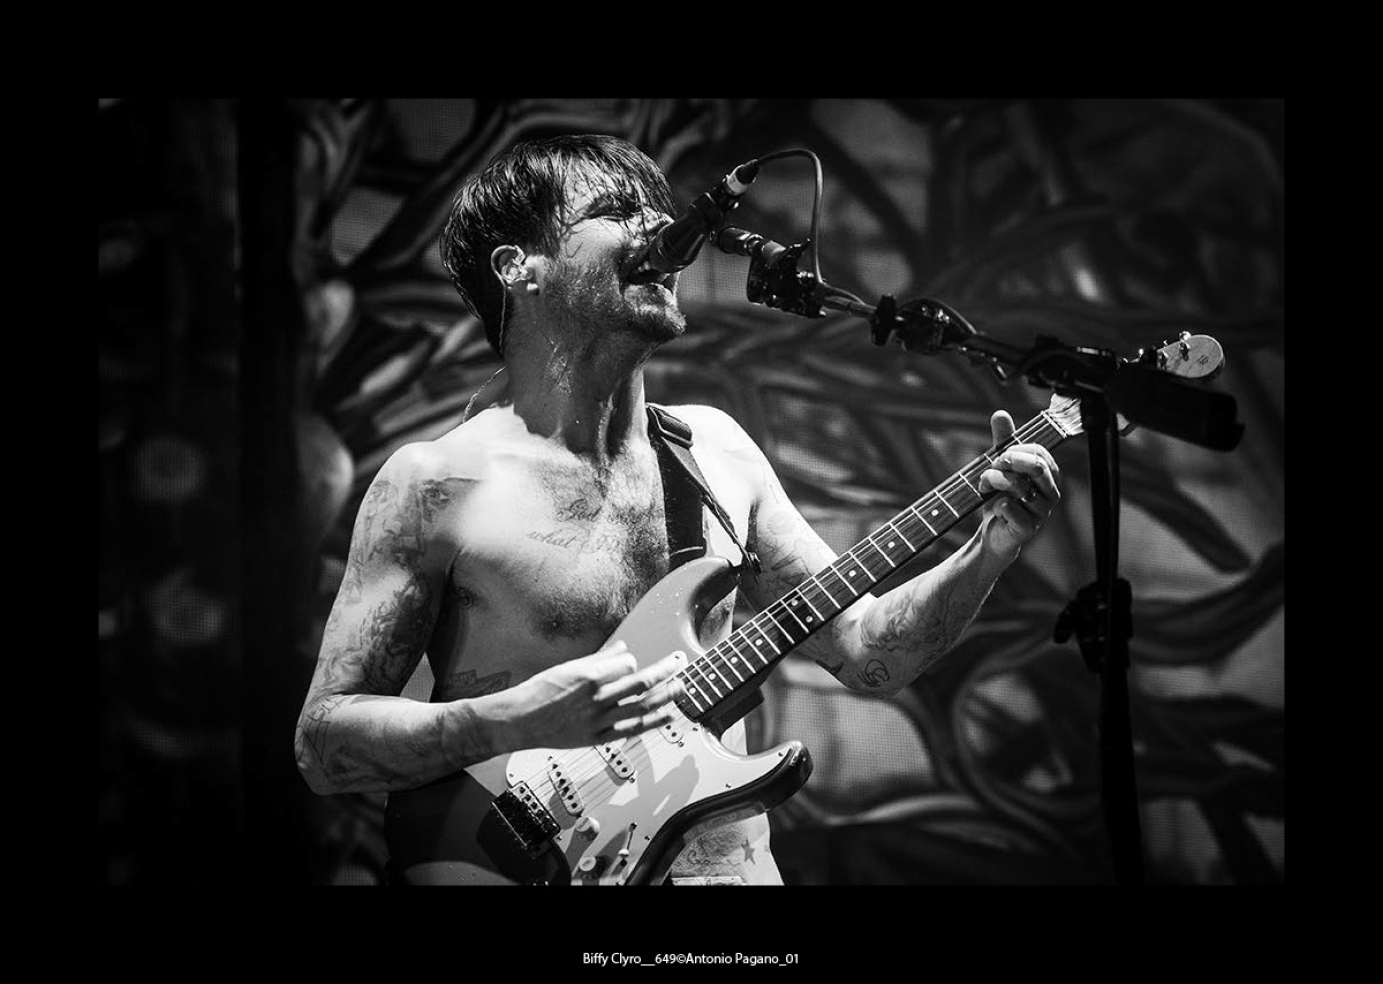 Photography for Biffy Clyro by Antonio Pagano